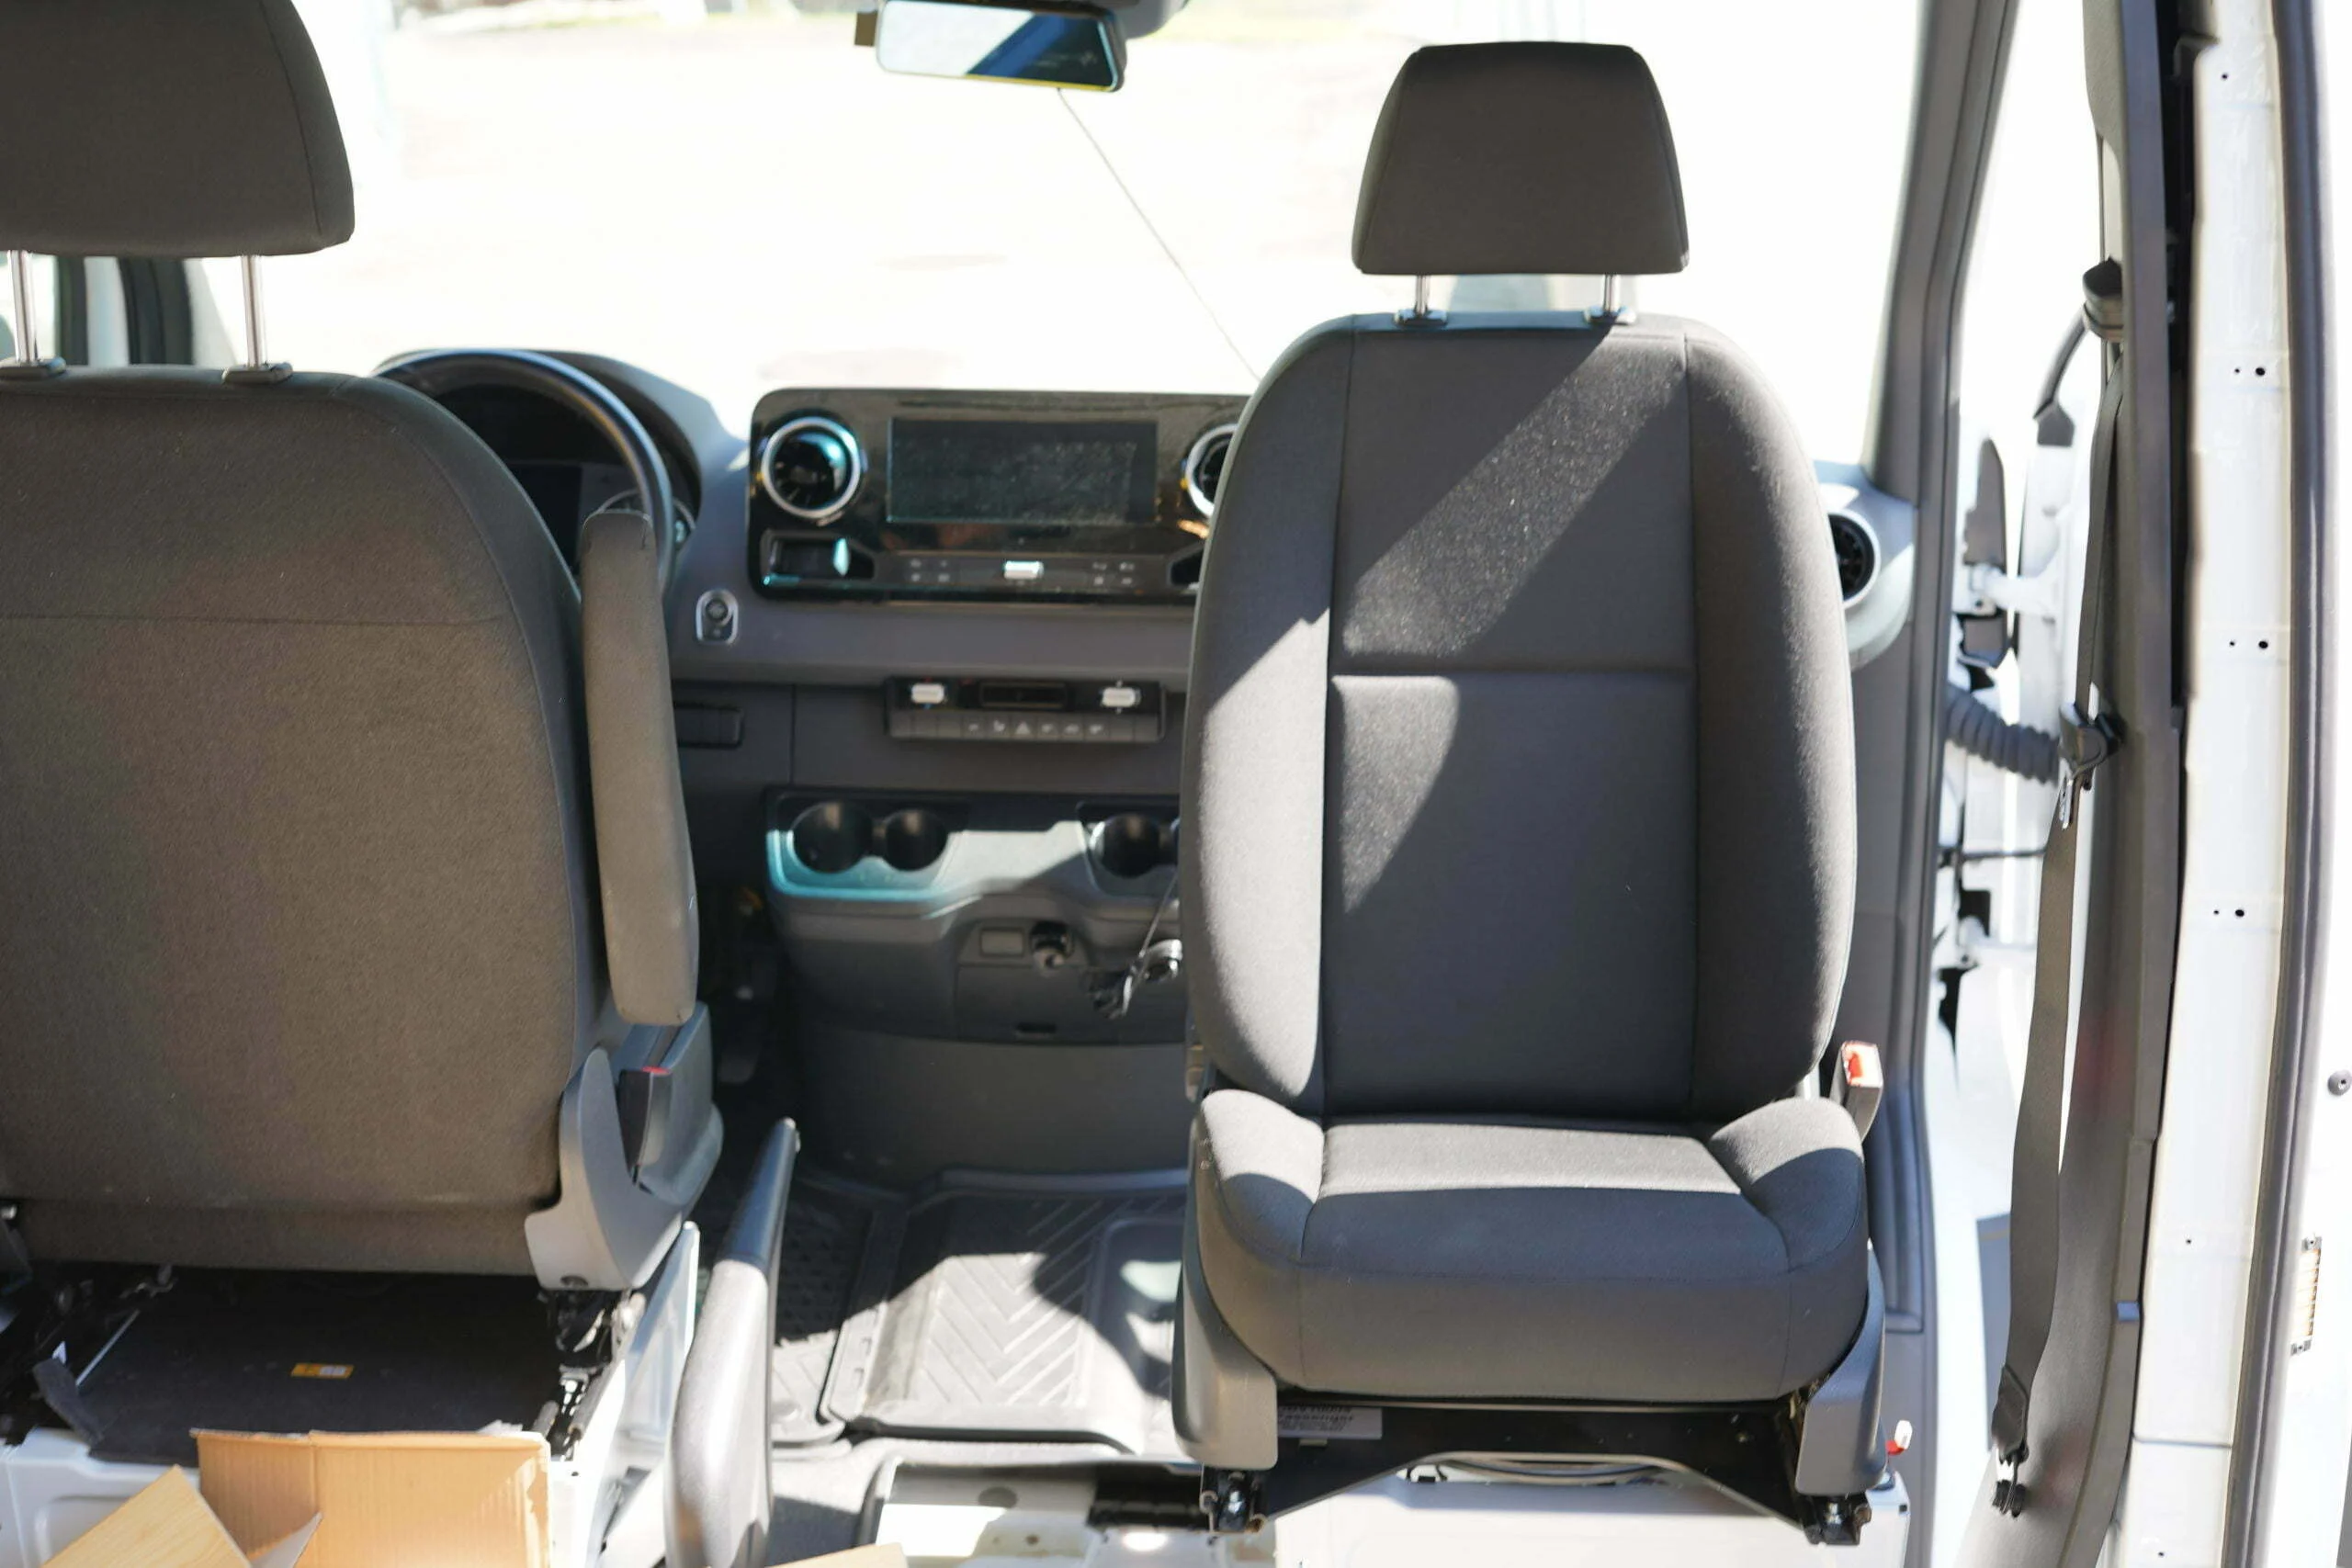 Exchange the double seat for a single seat - including swivel console